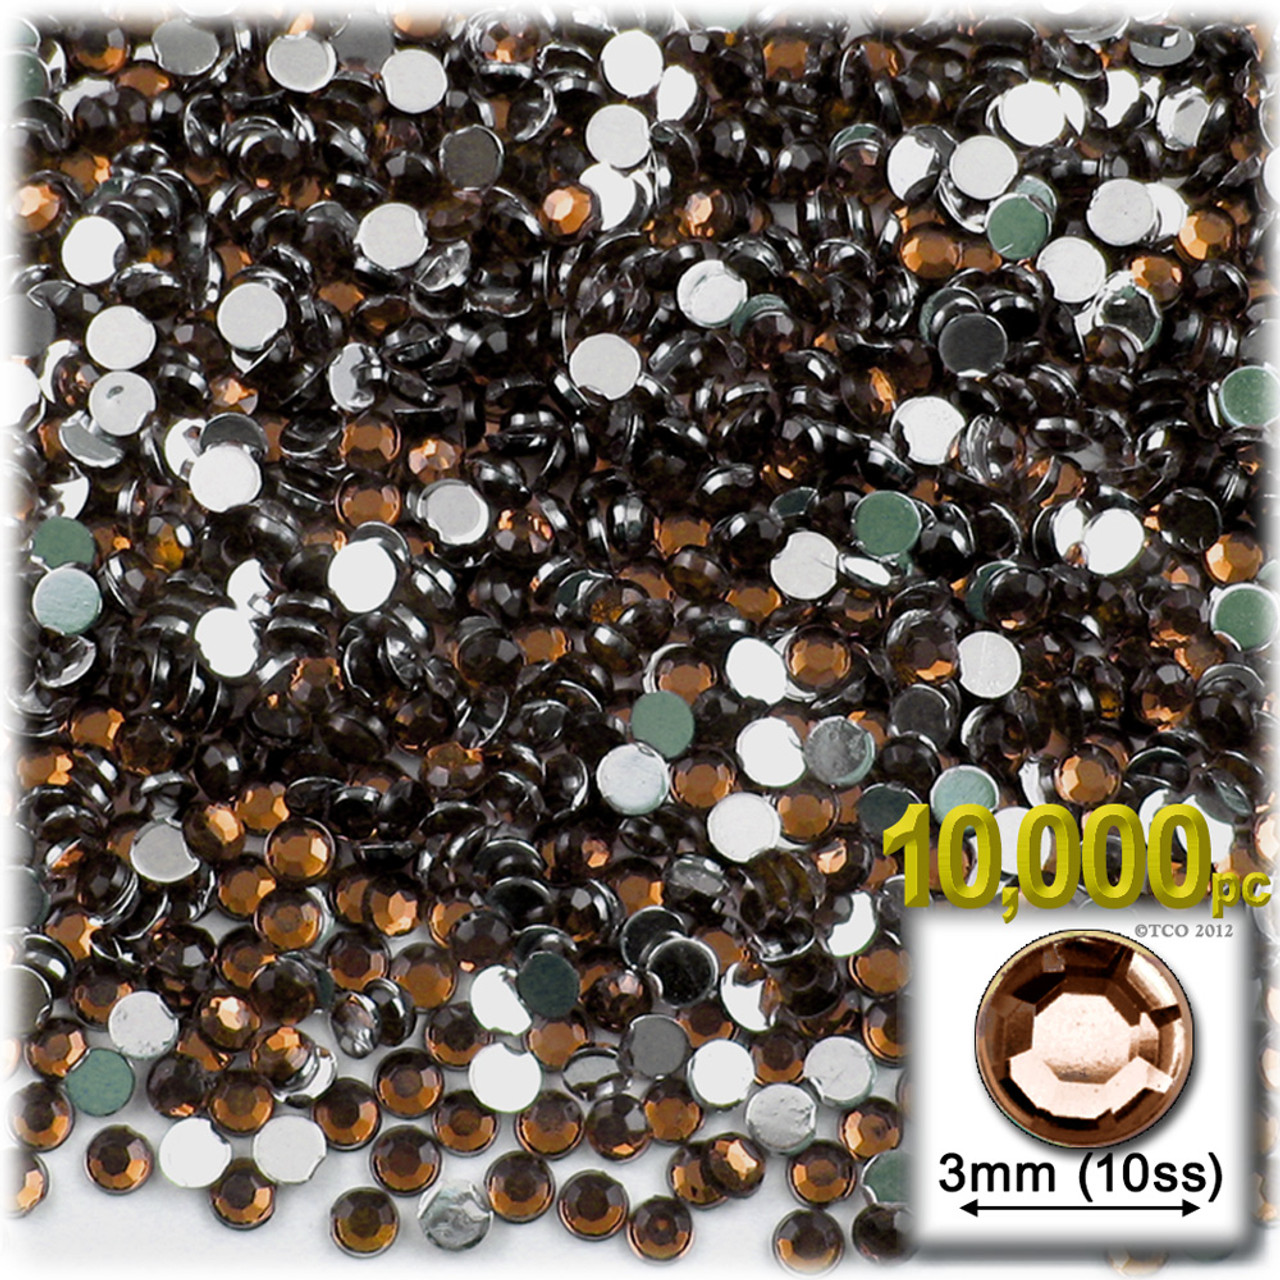 The Crafts Outlet 10,000pc Rhinestones Round 3mm (10ss) Beer Brown